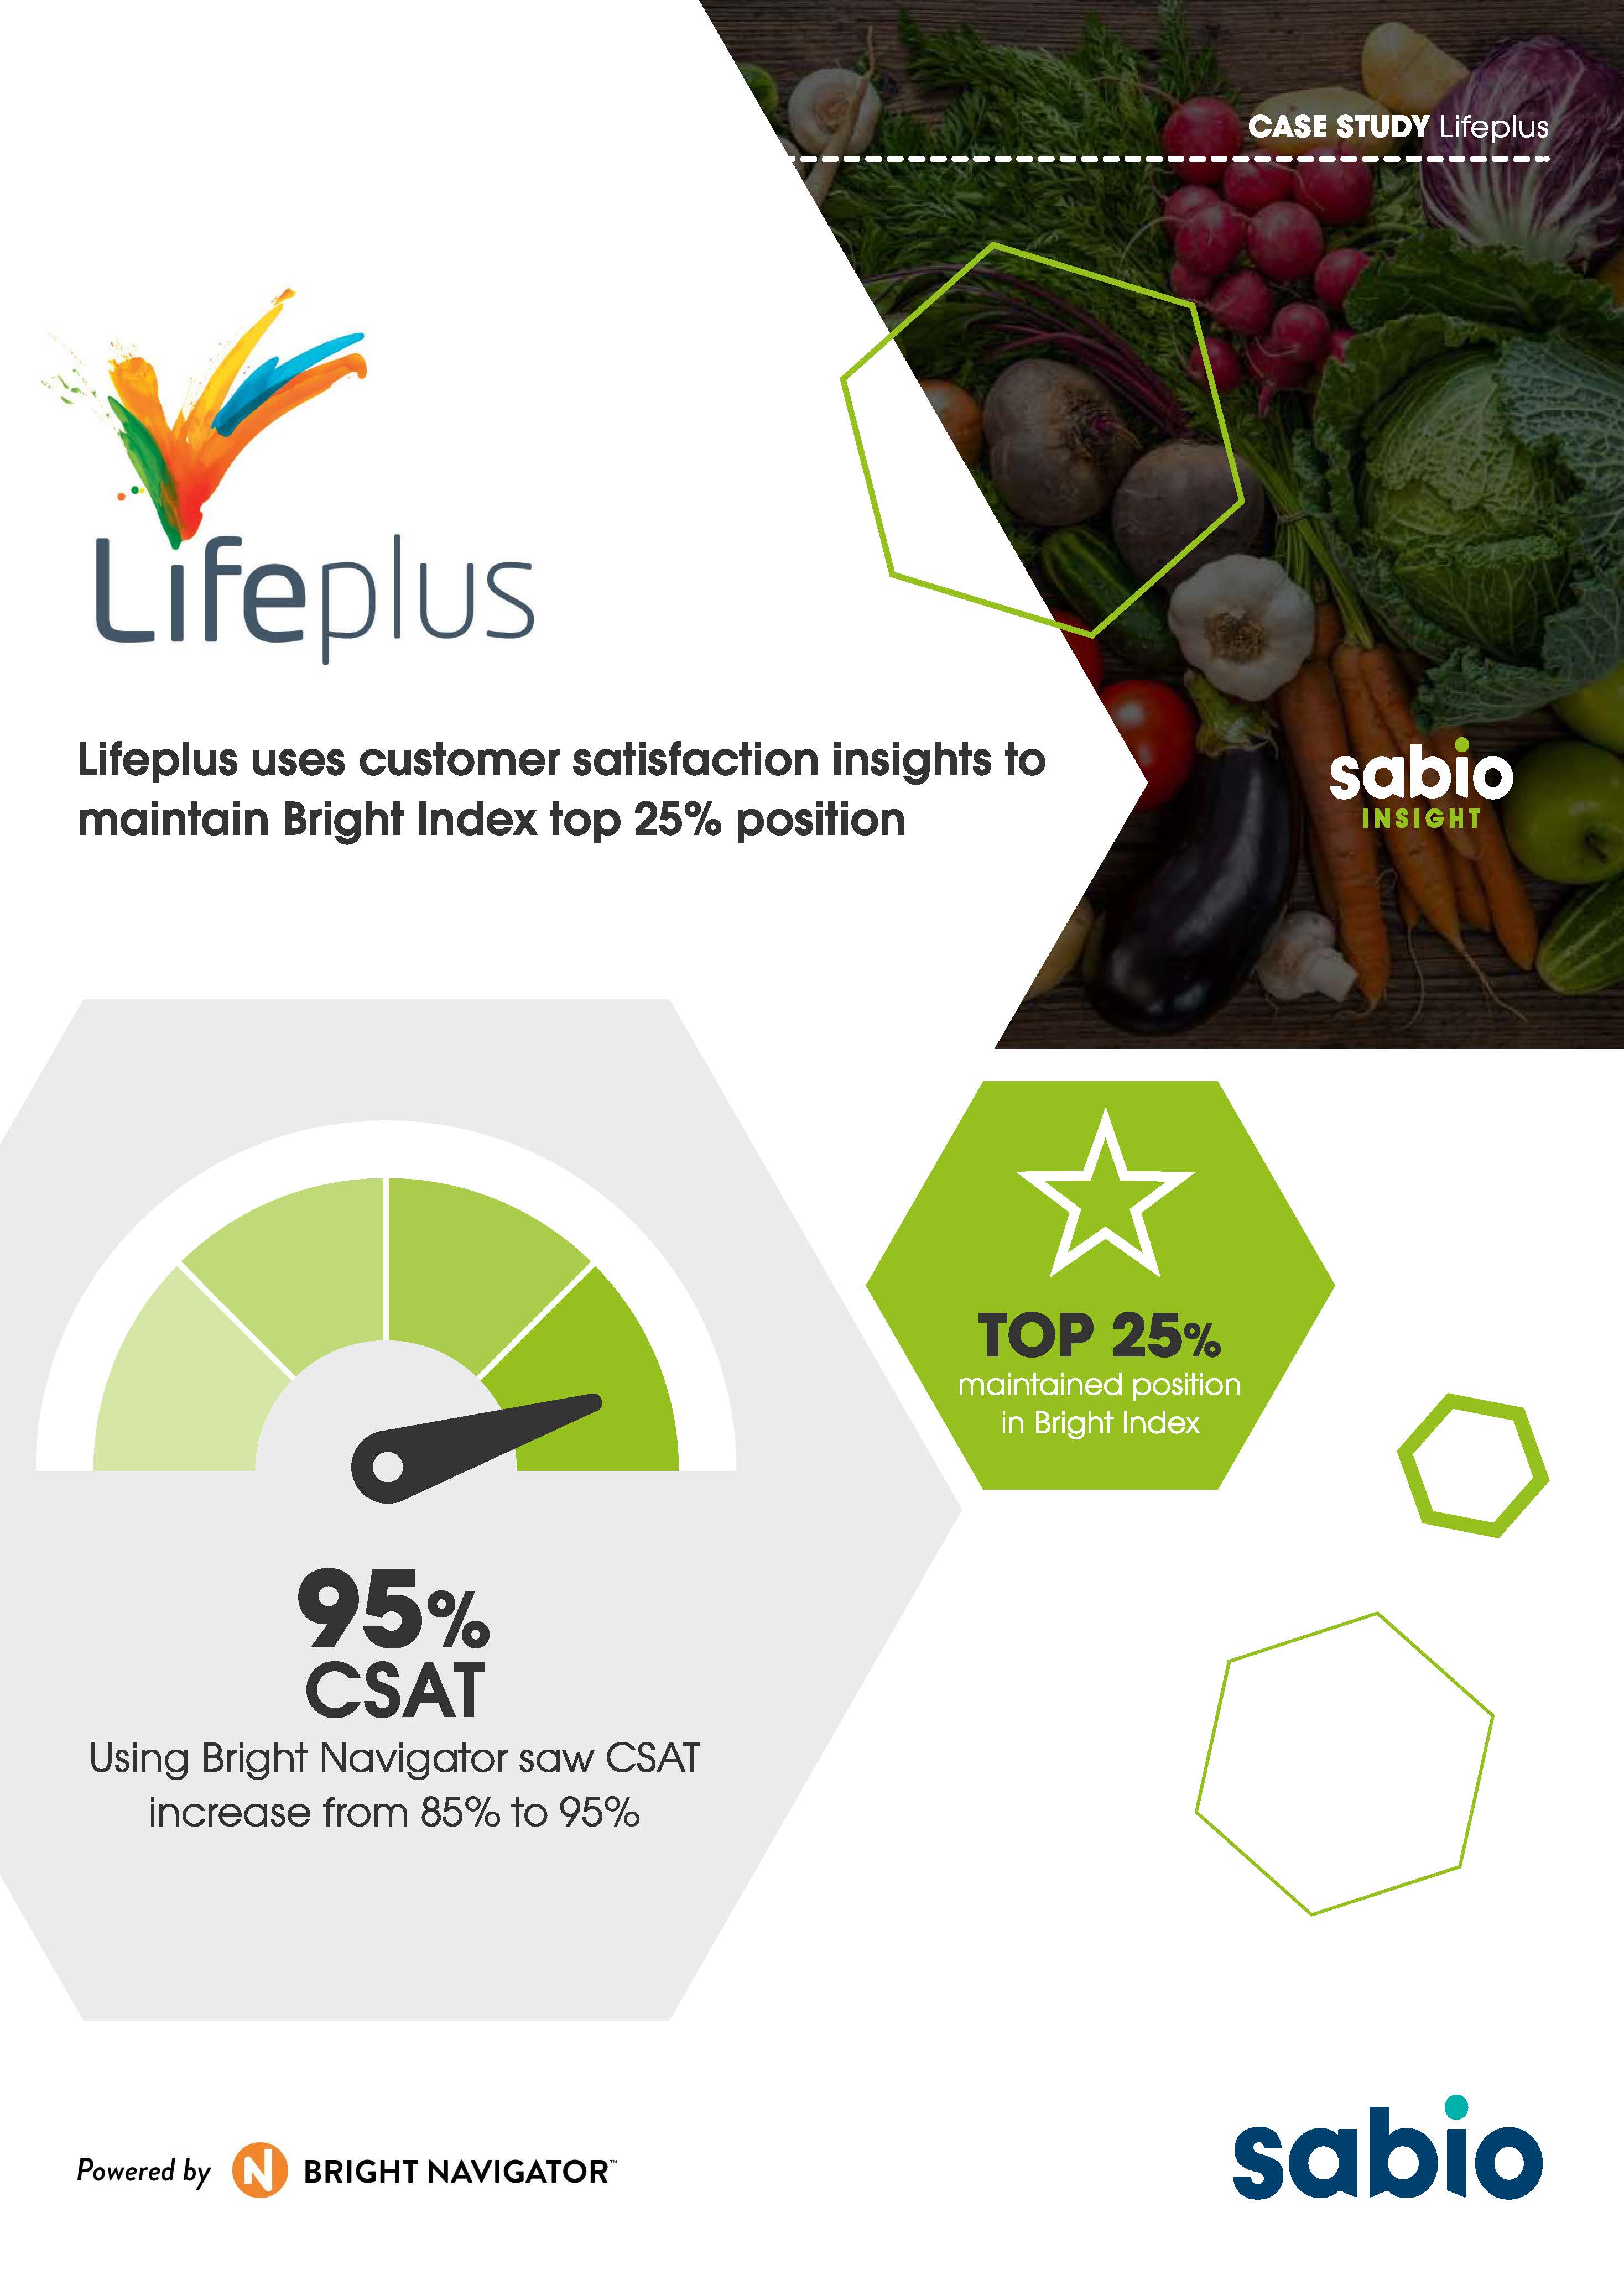 Lifeplus uses customer satisfaction insights to maintain Bright Index top 25% position